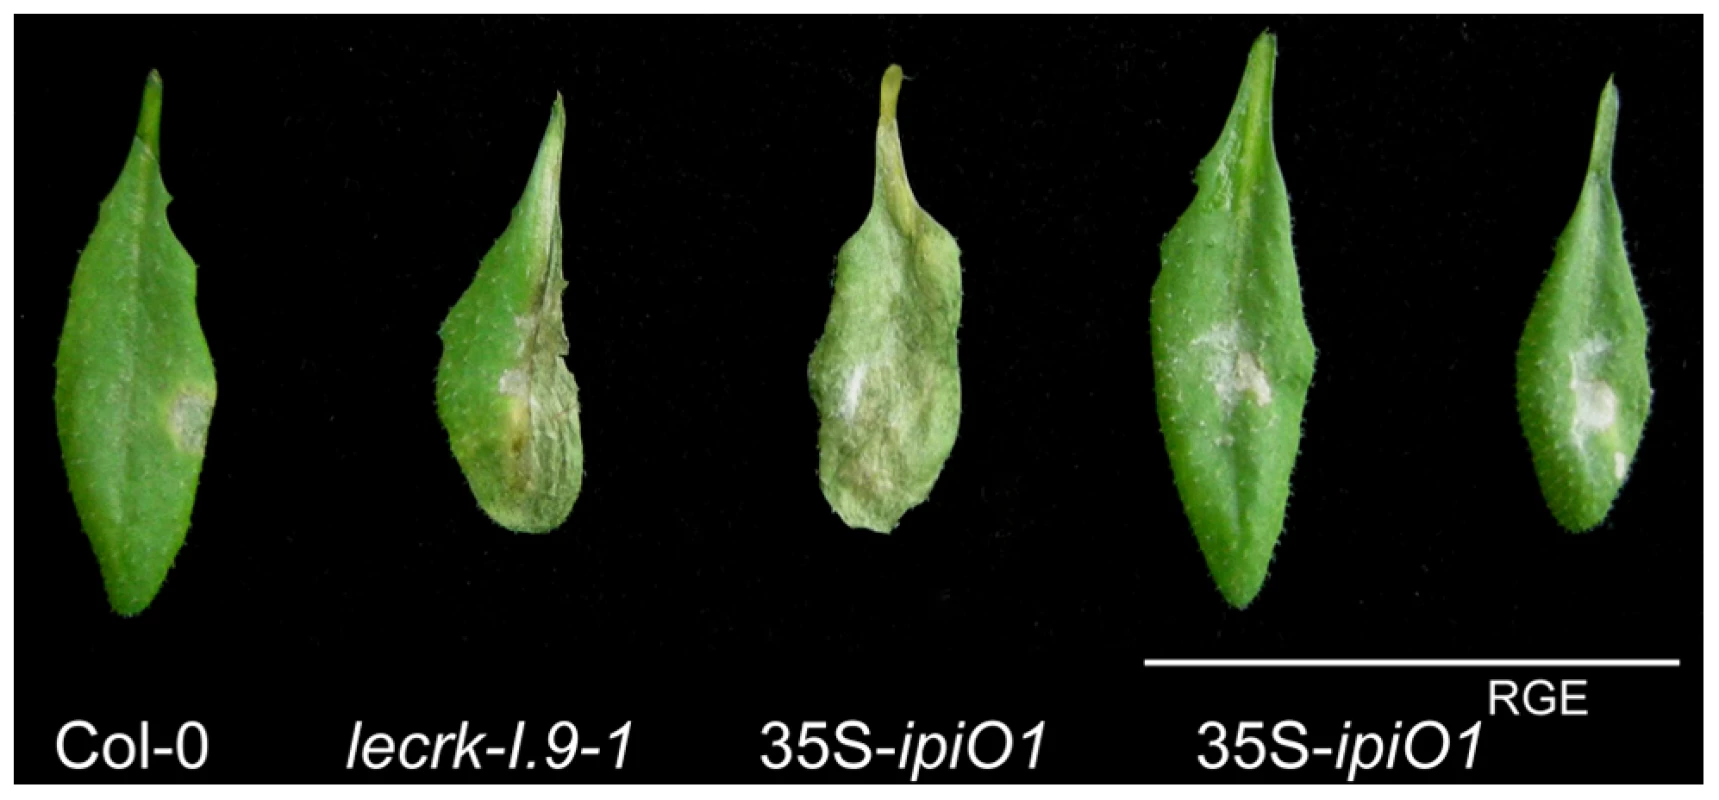 The RGD motif in IPI-O is a determinant of the phenotypic changes.